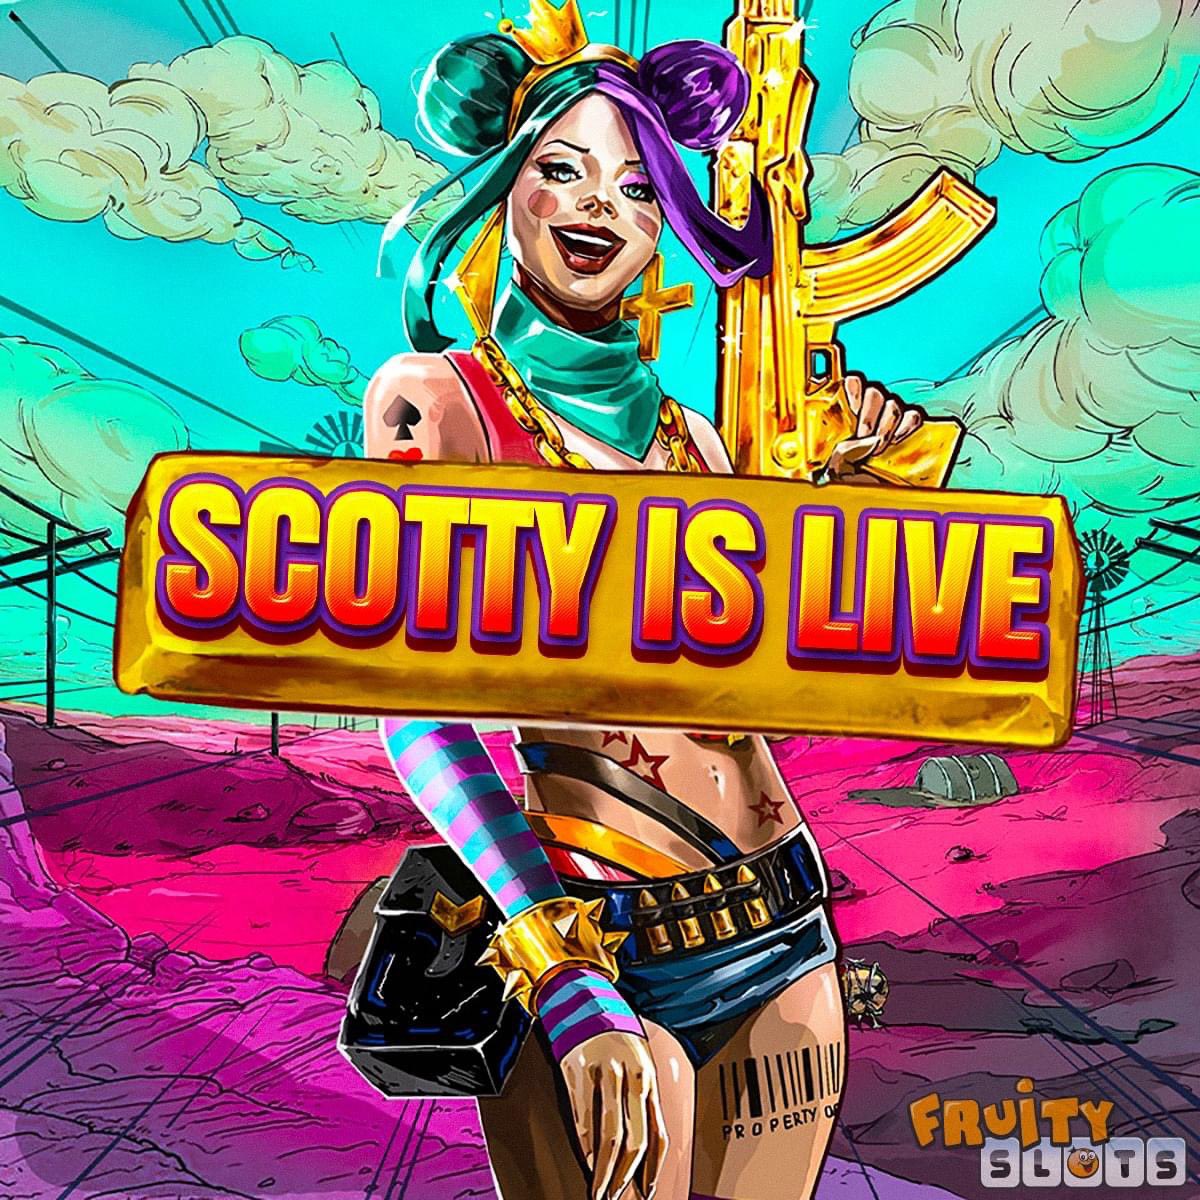 SCOTTY IS LIVE&#129321; Thursday Slots Live!
Watch on Youtube&#128073; 
Watch on Twitch&#128073;